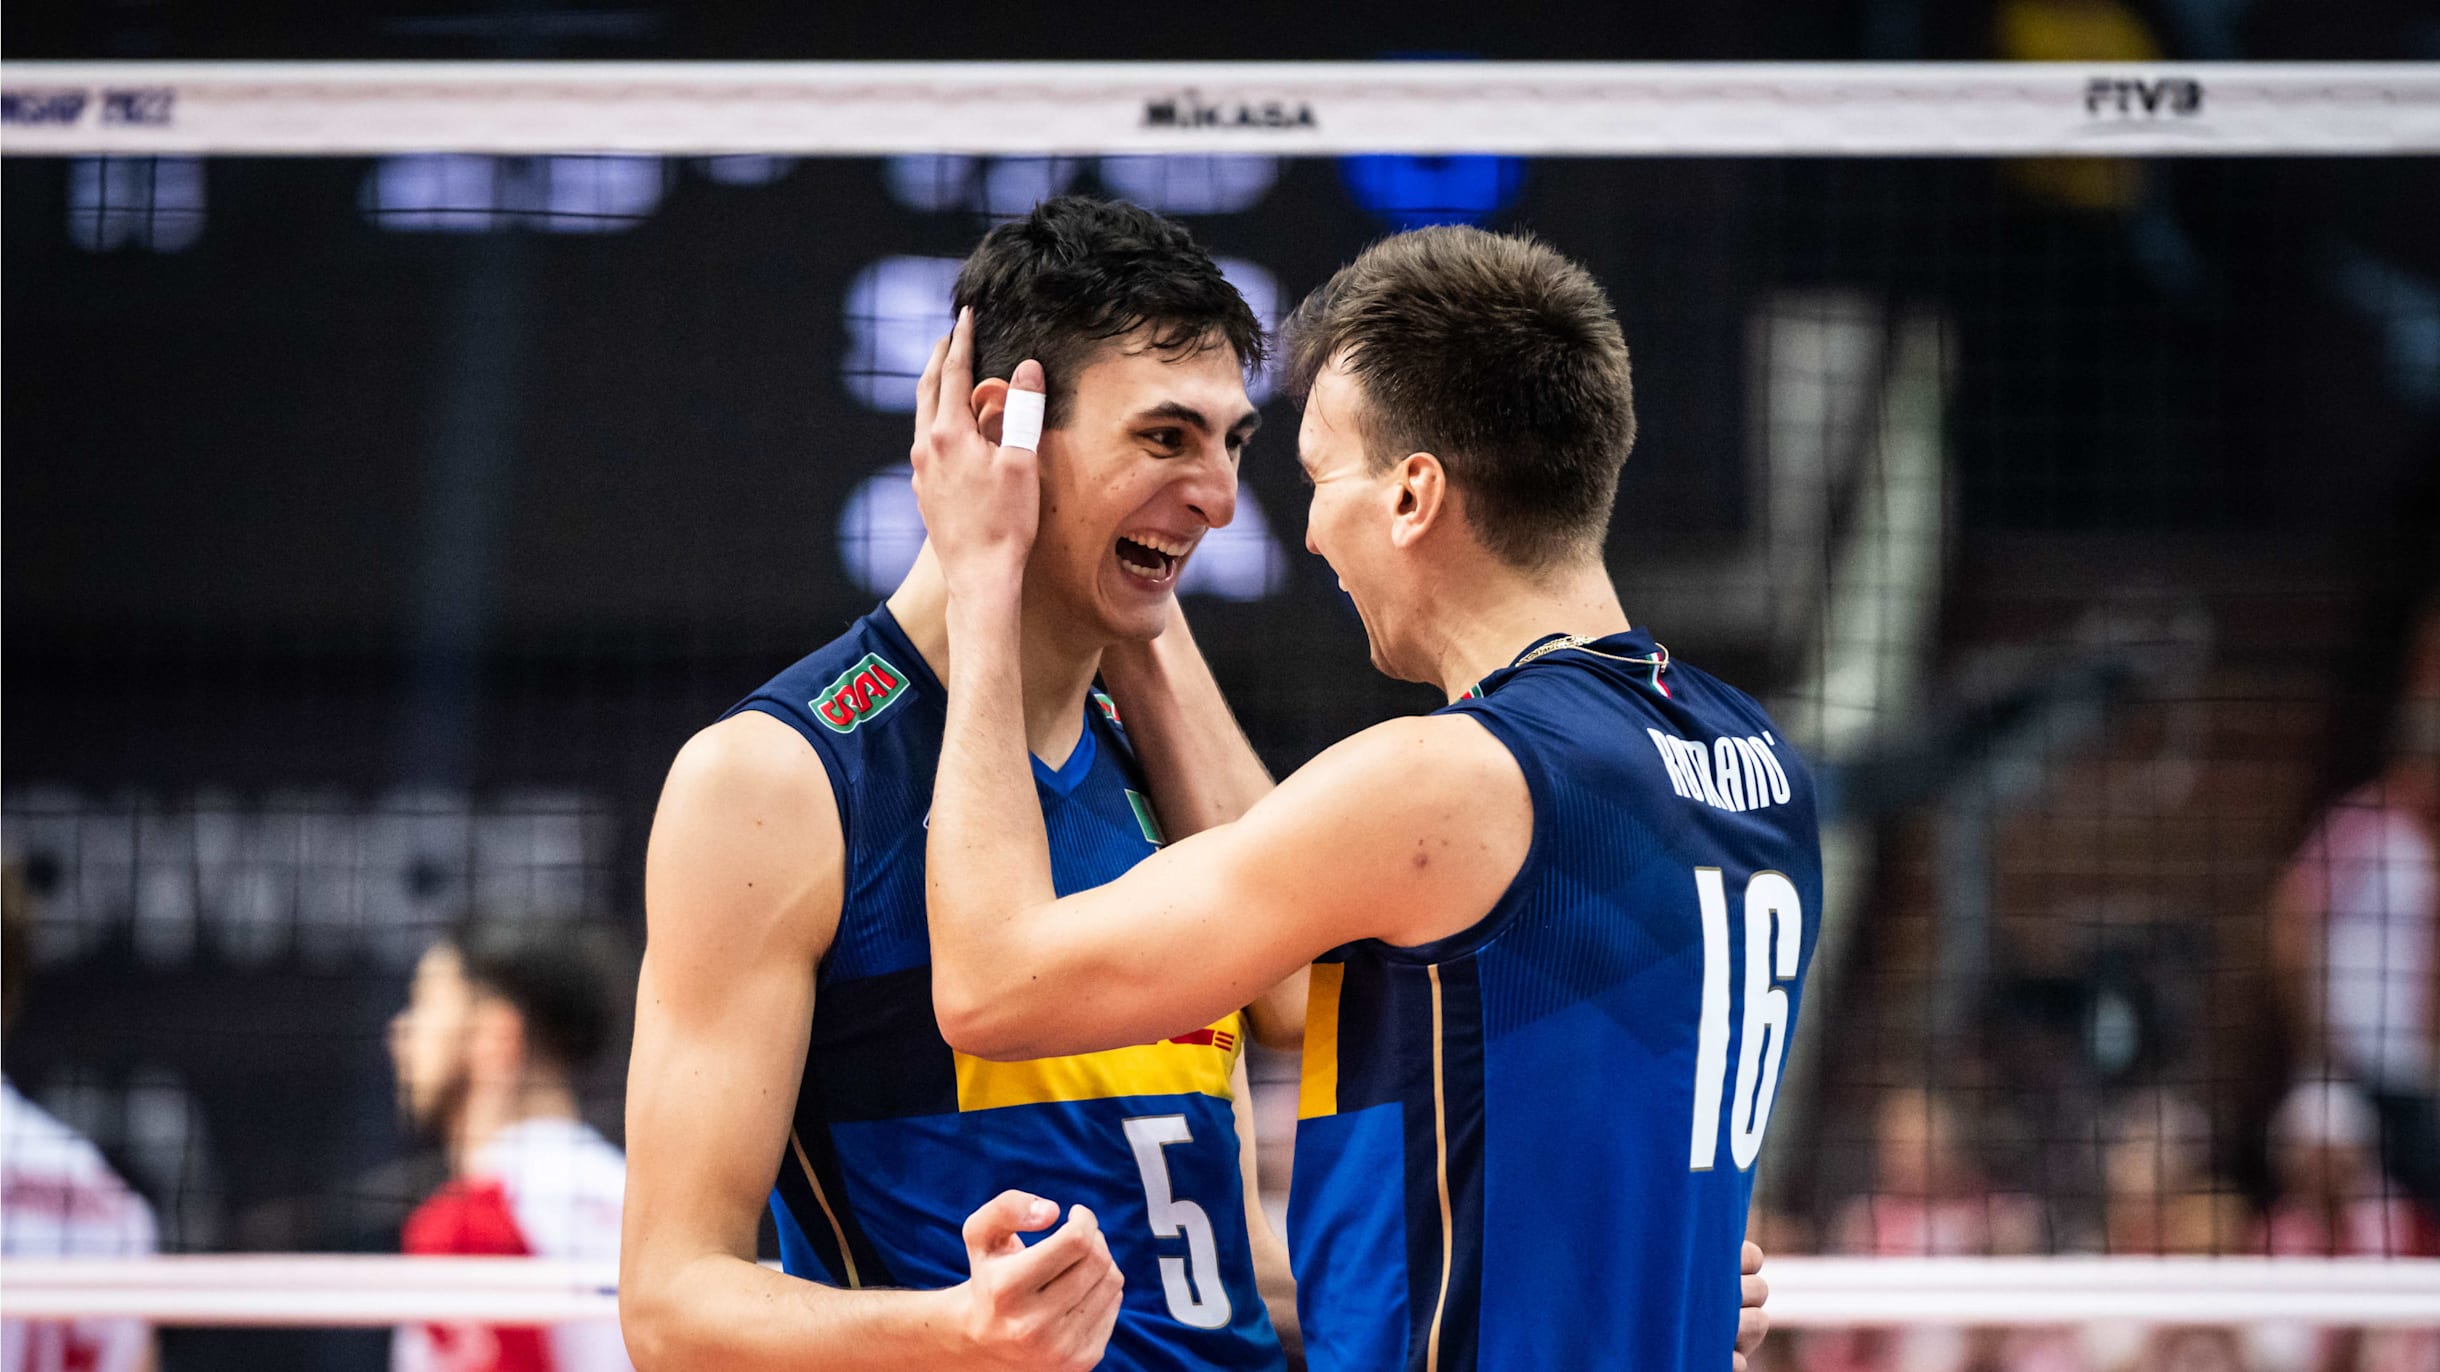 Italy win FIVB Volleyball Mens World Championship 2022 results